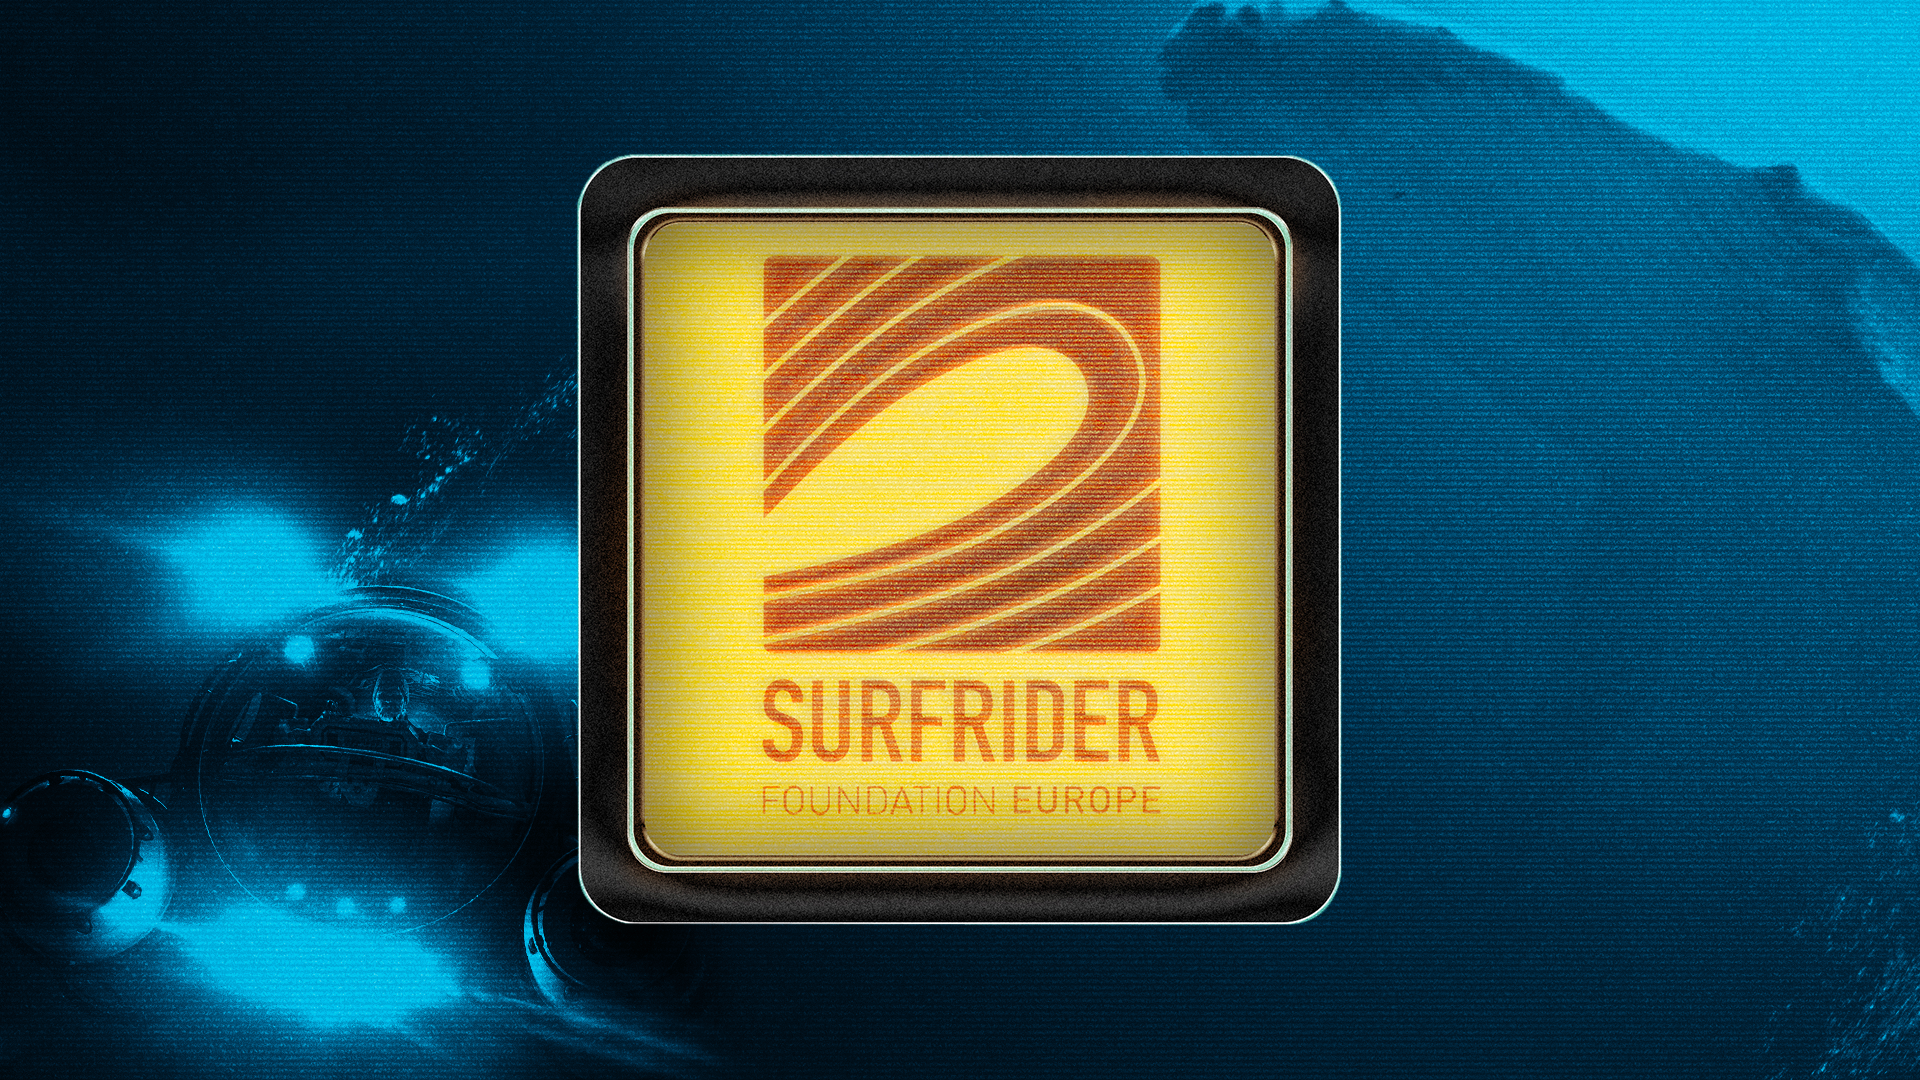 Icon for Surfrider: Master Upcycler